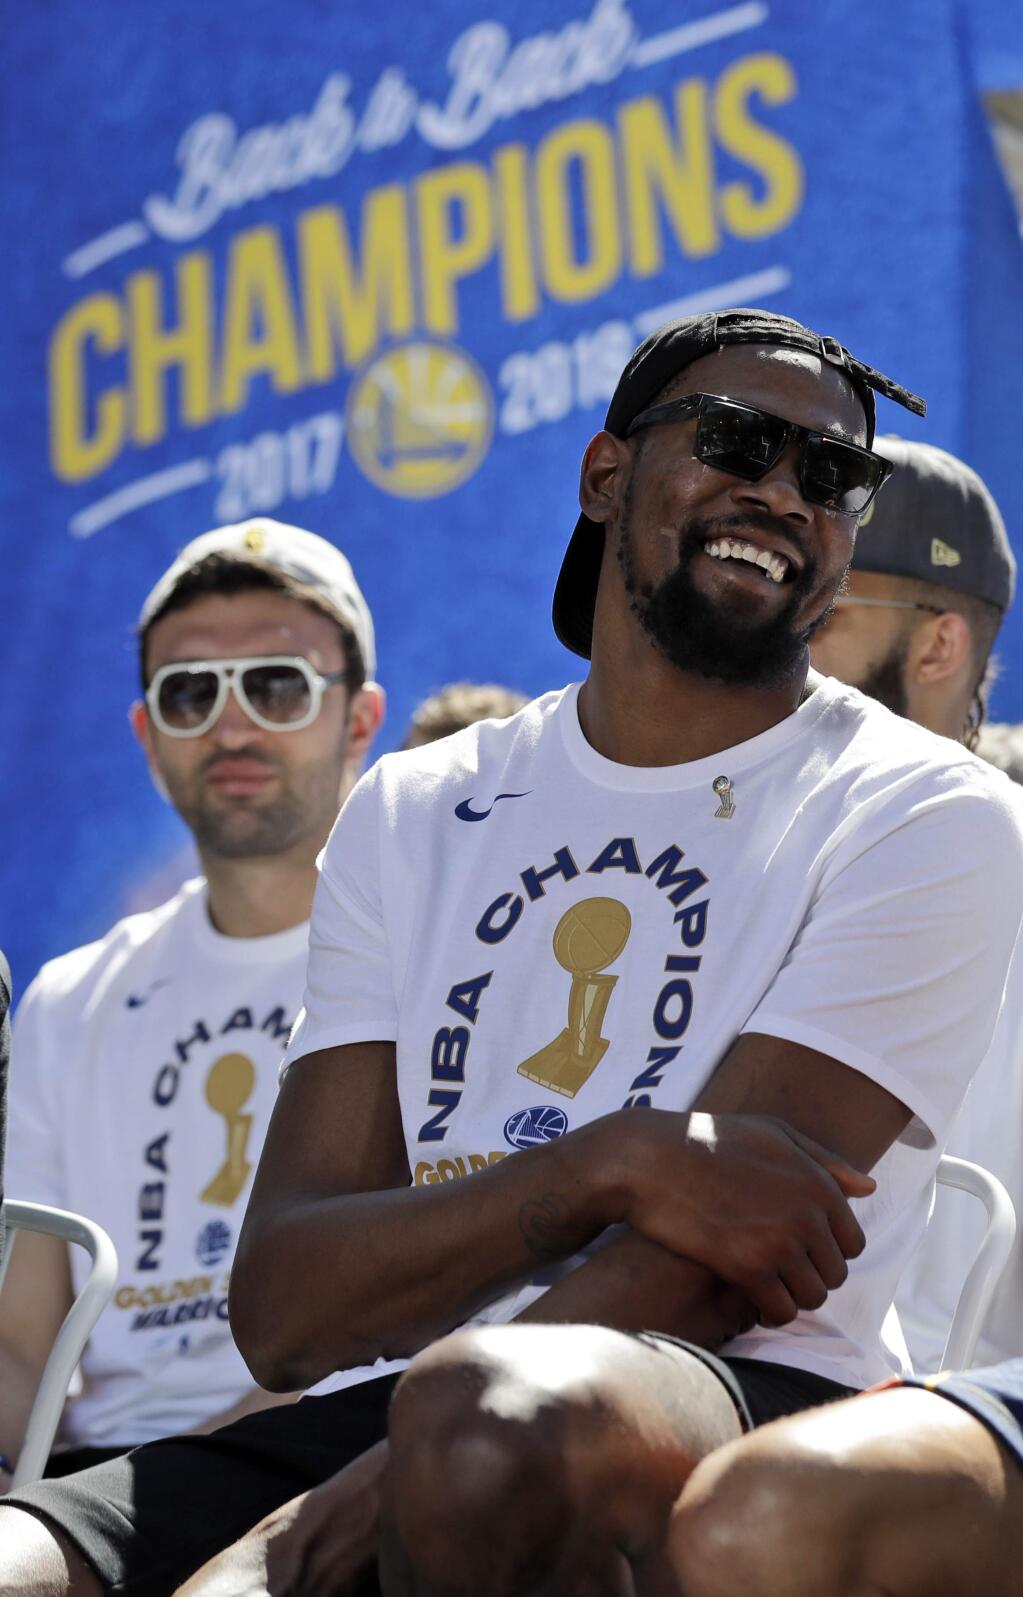 Golden State Warriors' Kevin Durant smiles before the start of the team's NBA championship parade, Tuesday, June 12, 2018, in Oakland, Calif. (AP Photo/Marcio Jose Sanchez)